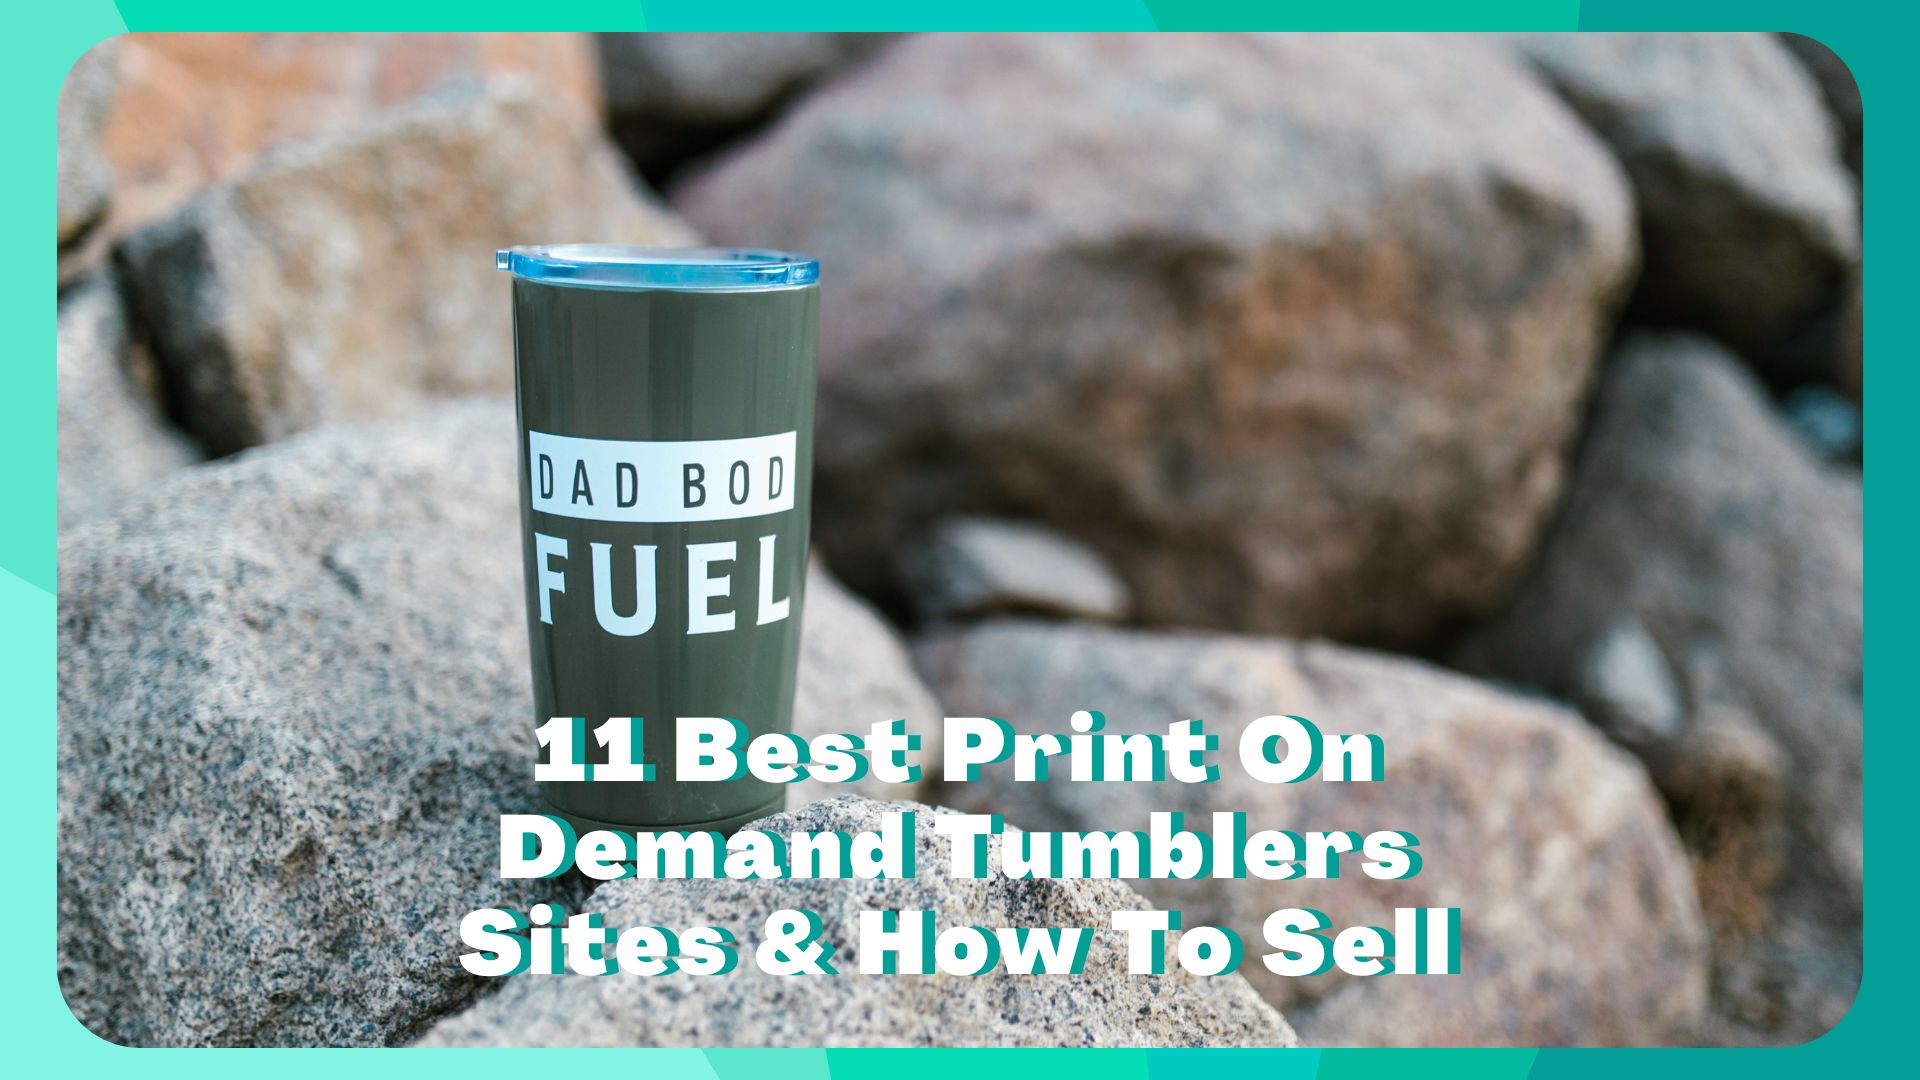 https://passivemarketeer.com/wp-content/uploads/2022/03/Passive-Marketeer-11-best-print-on-demand-tumblers-sites-how-to-sell.jpg